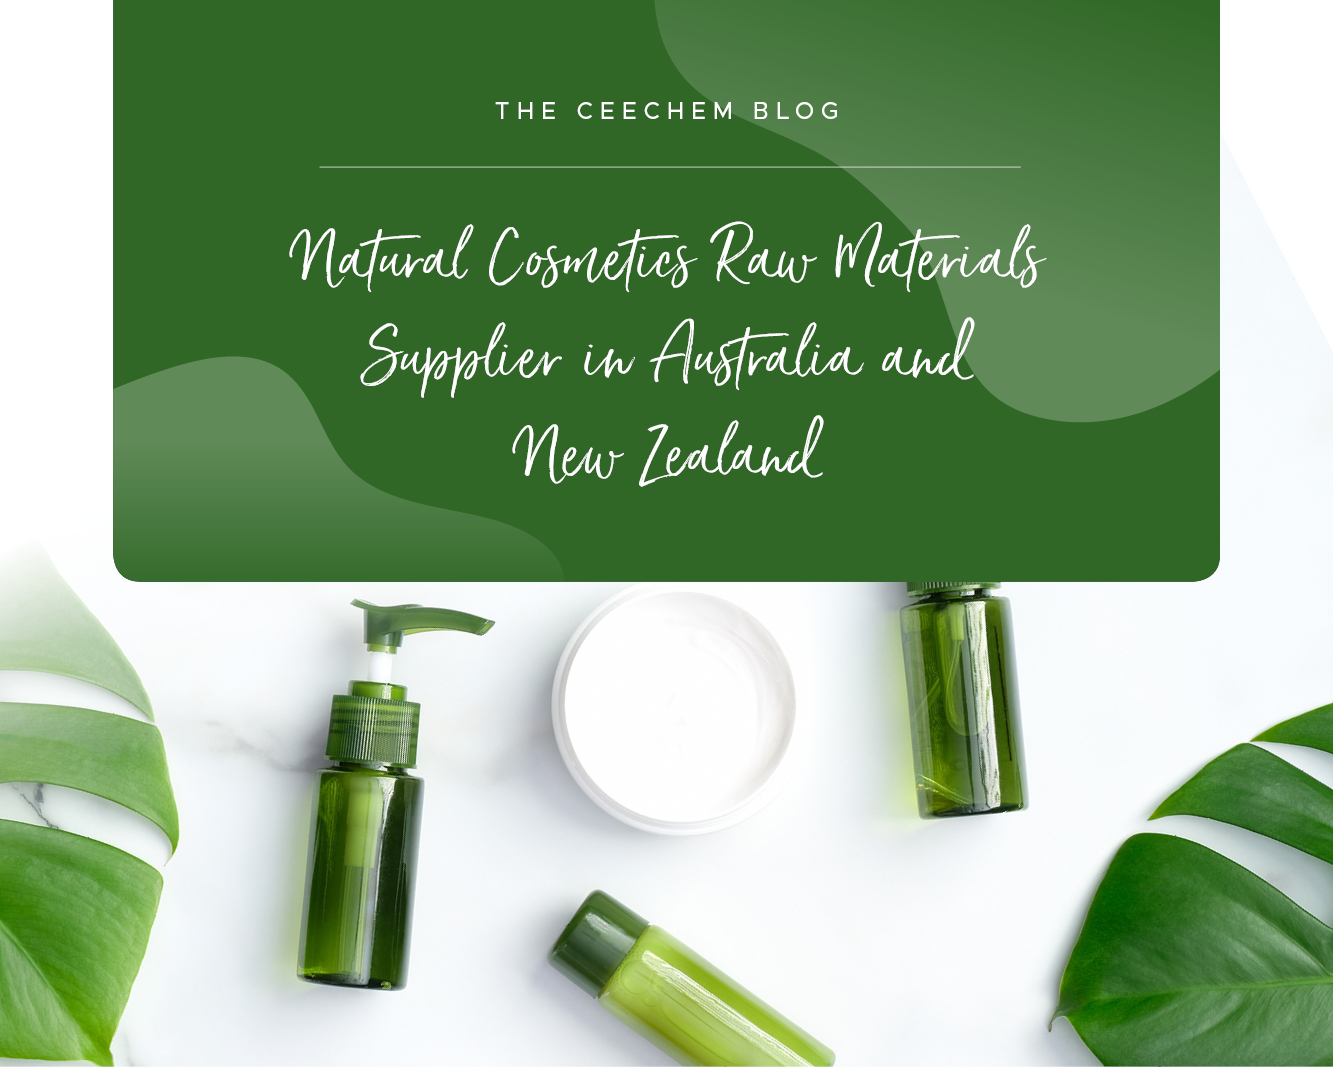 Natural Cosmetics Raw Materials Supplier in Australia and New Zealand